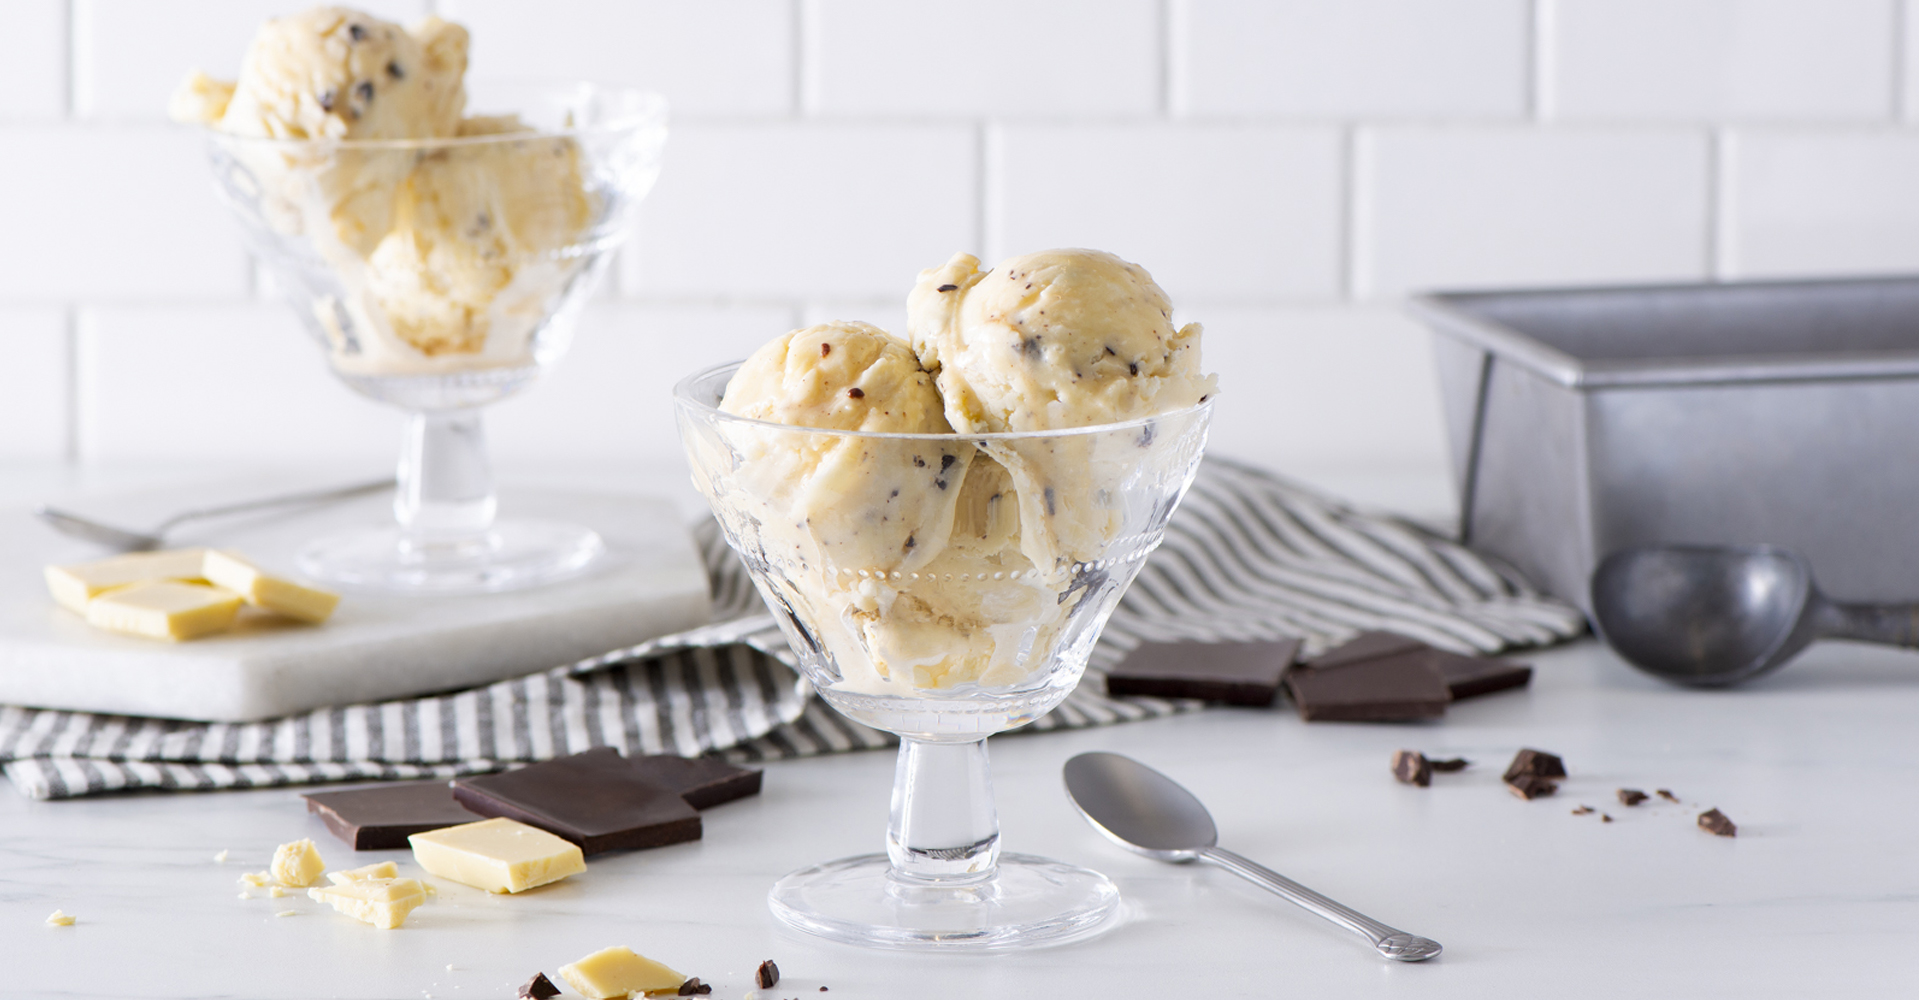 Double Chocolate Truffle Ice Cream scooped into glass dishes with spoons.